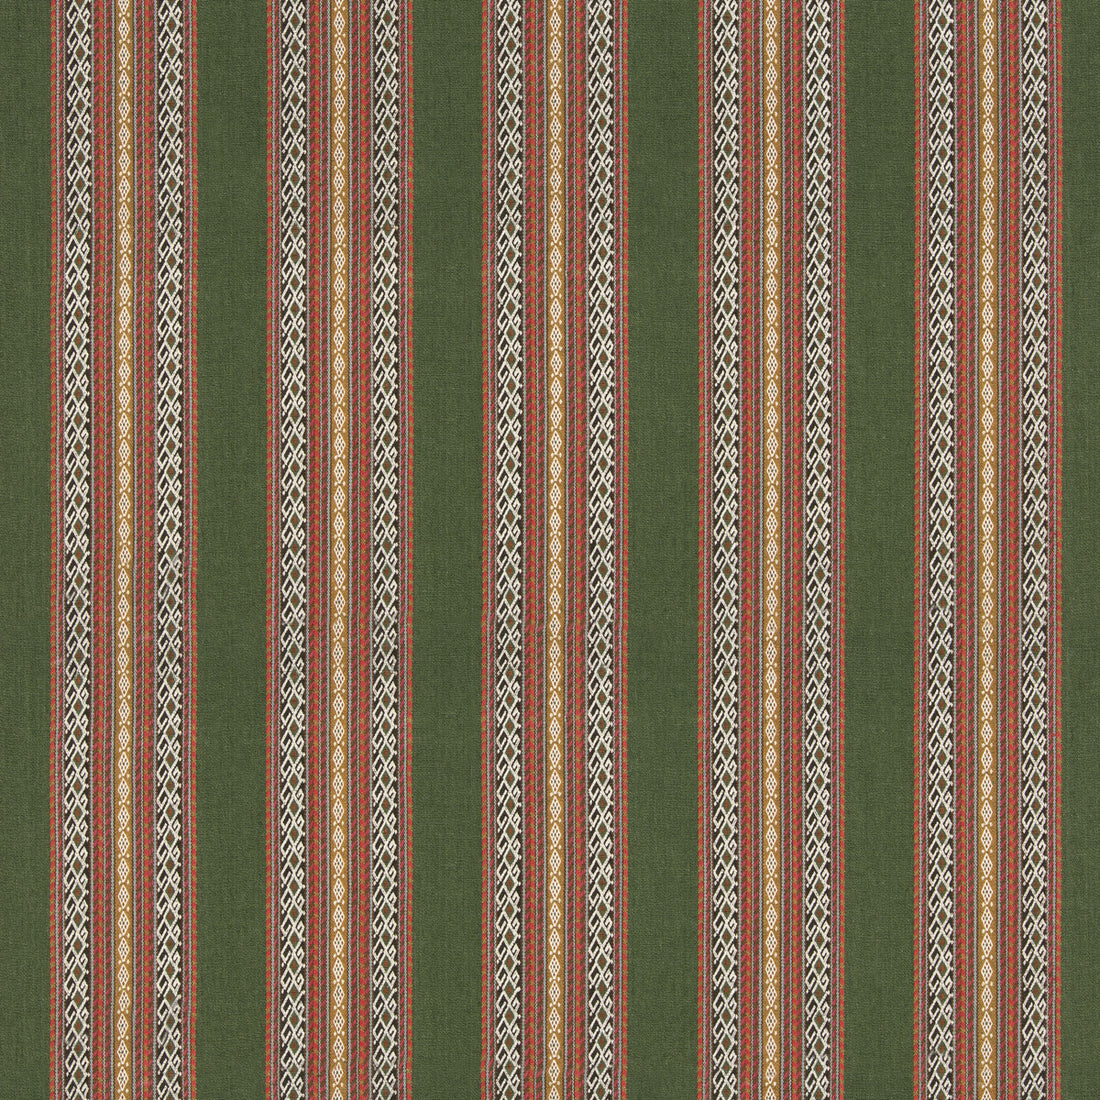 Worlds Apart fabric in green/coral color - pattern BF11059.4.0 - by G P &amp; J Baker in the X Kit Kemp Stripes collection